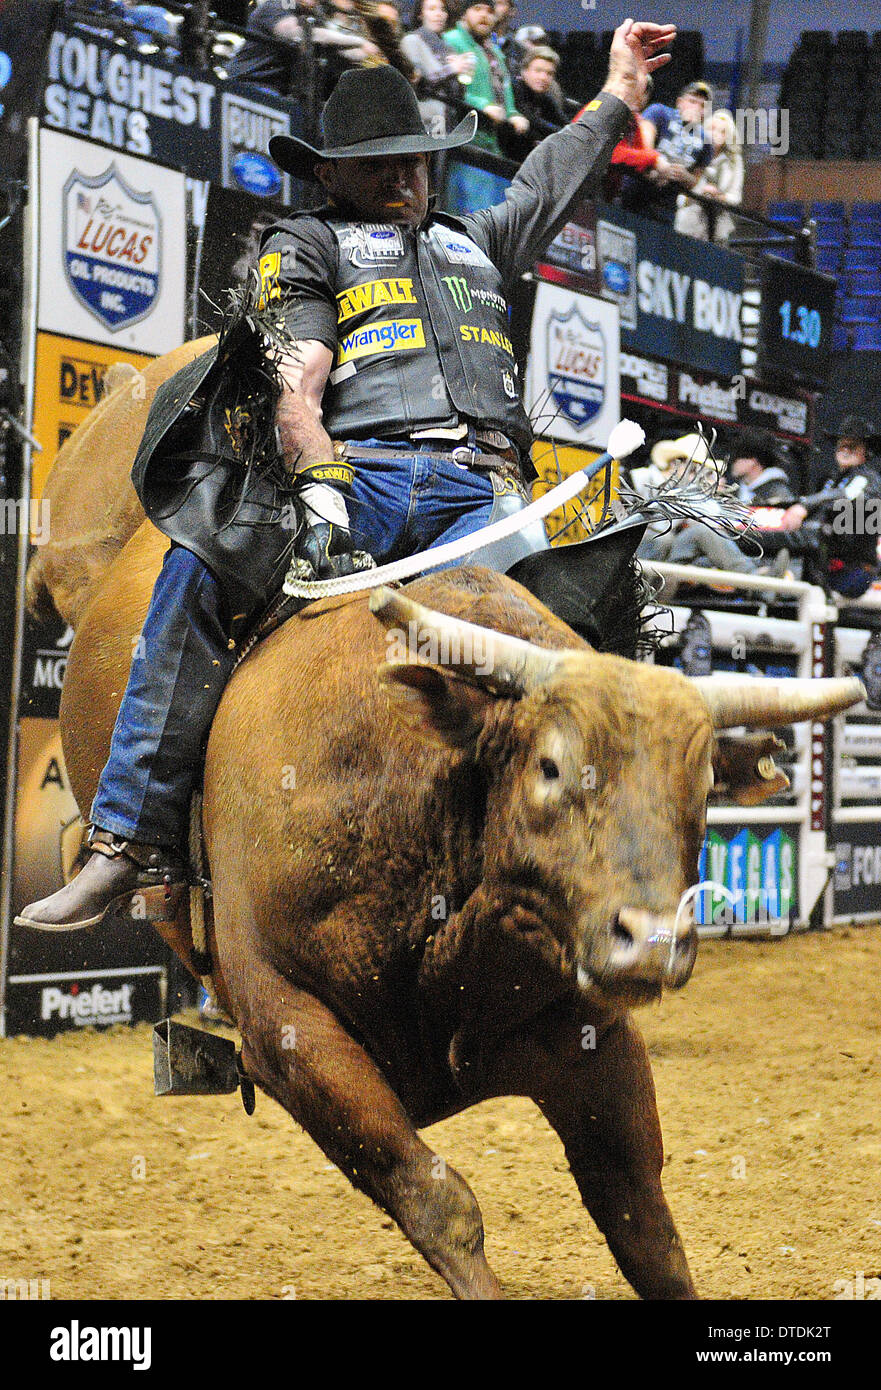 St. Louis, Missouri, USA. 15th Feb, 2014. February 14, 2014: Rider Guilherme Marchi on bull Packing Heat during the Professional Bullriders Built Ford Tough Series St. Louis Invitational at Scott Trade Center in St. Louis. Credit:  csm/Alamy Live News Stock Photo